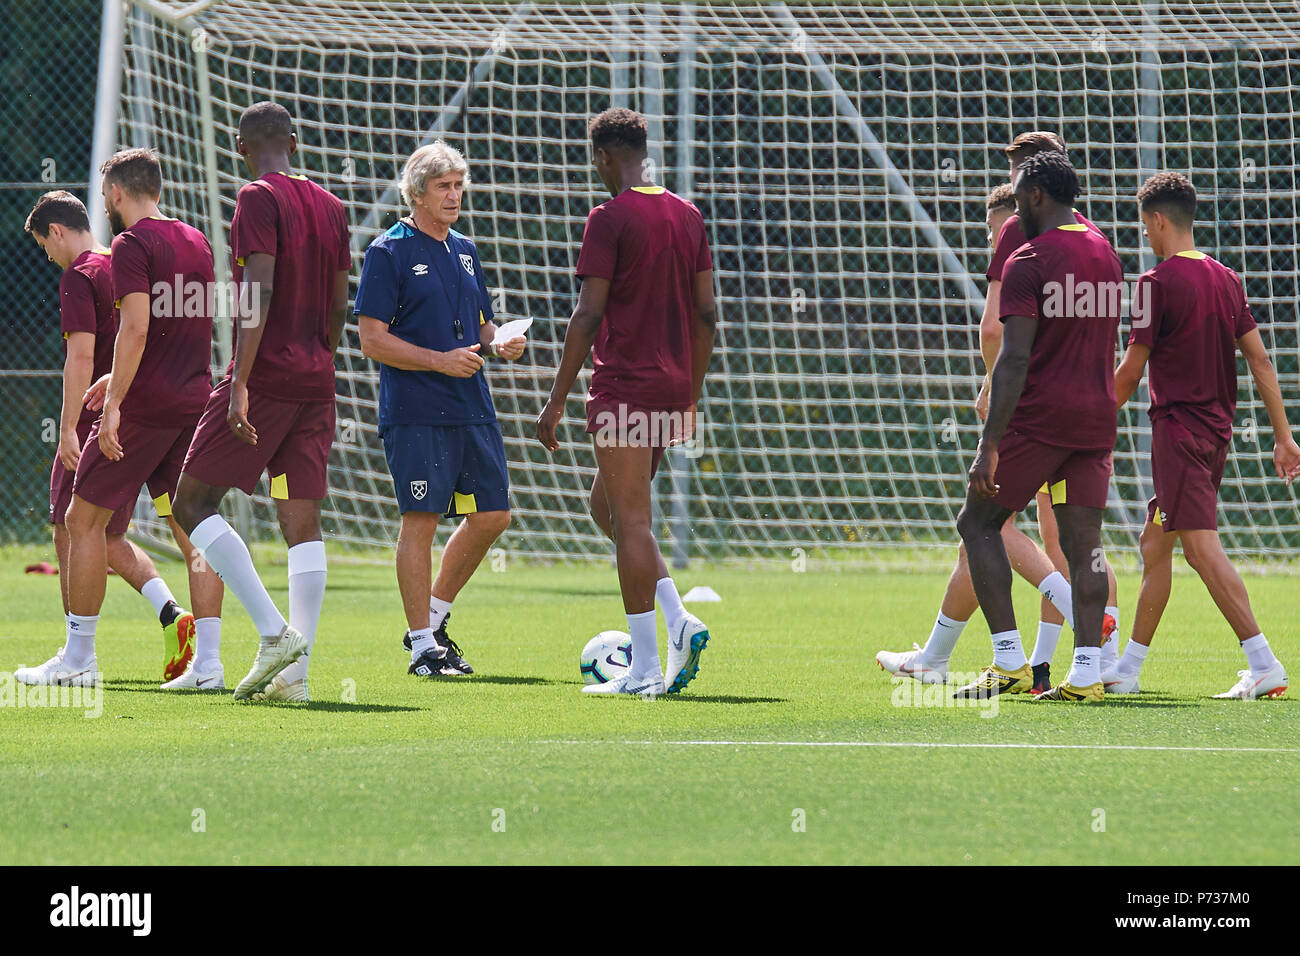 Bad Ragaz, Switzerland. 4th July 2018. West Ham United Team Manager Manuel  Pellegrini is giving instructions during a training session of West Ham  United's first team at the sports facility Ri-Au in